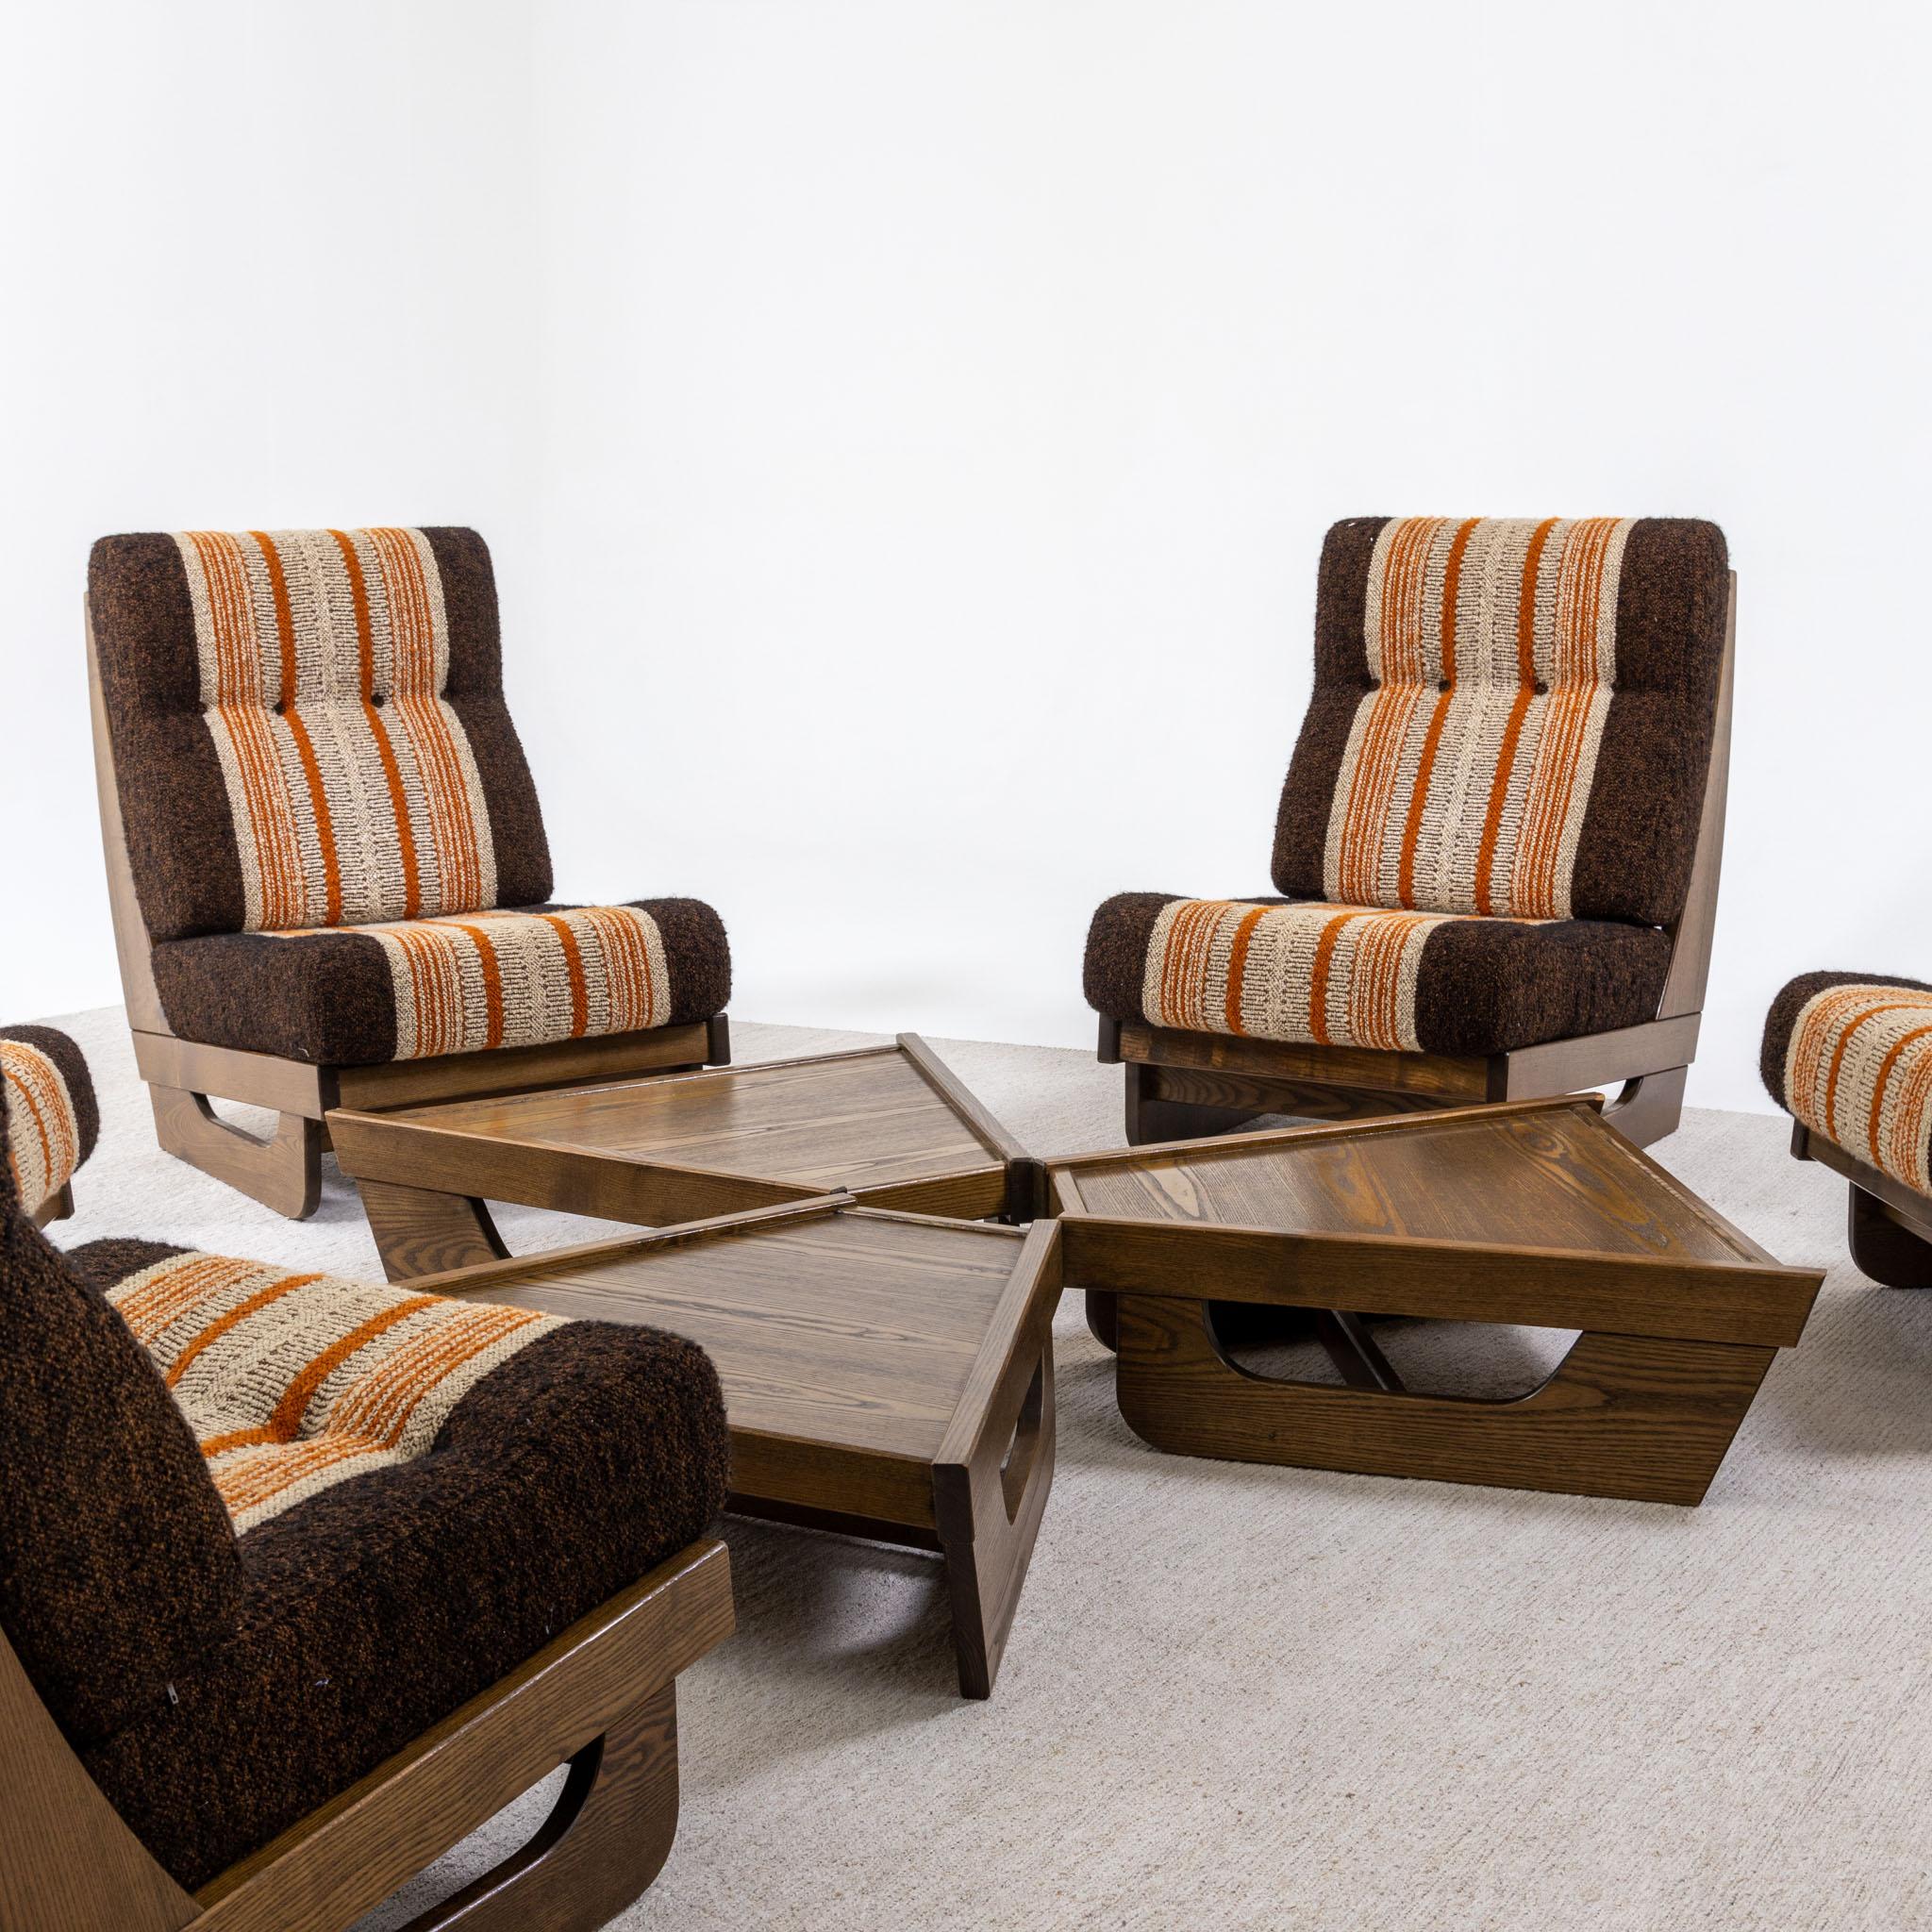 Modular Seating Group with five Lounge Chairs, Italy 1950s In Good Condition For Sale In Greding, DE